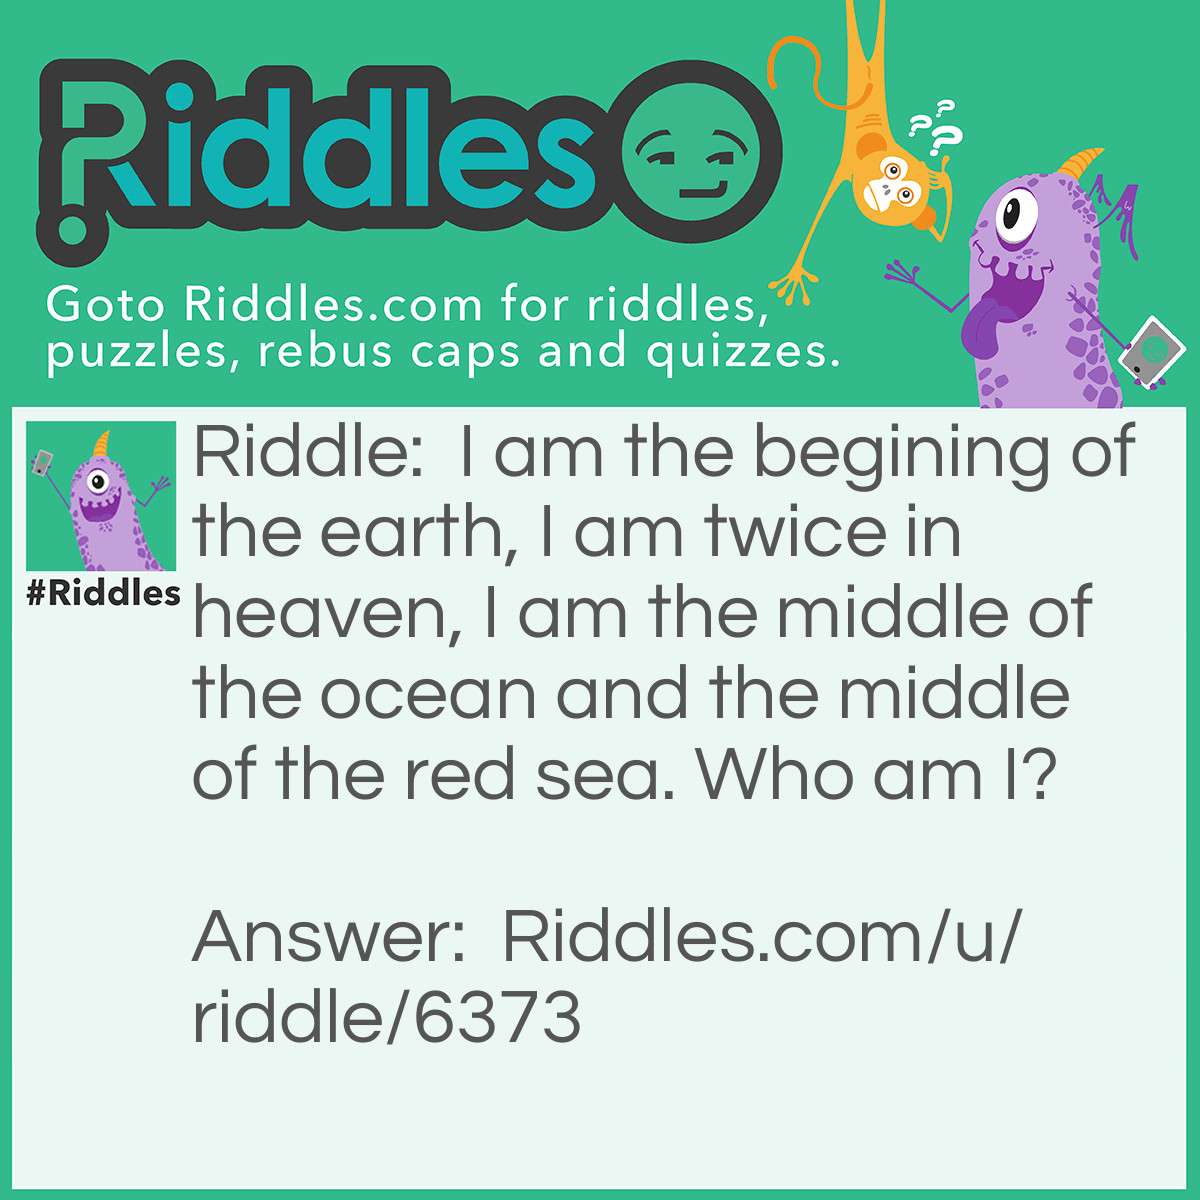 Riddle: I am the begining of the earth, I am twice in heaven, I am the middle of the ocean and the middle of the red sea. Who am I? Answer: Letter 'E'.